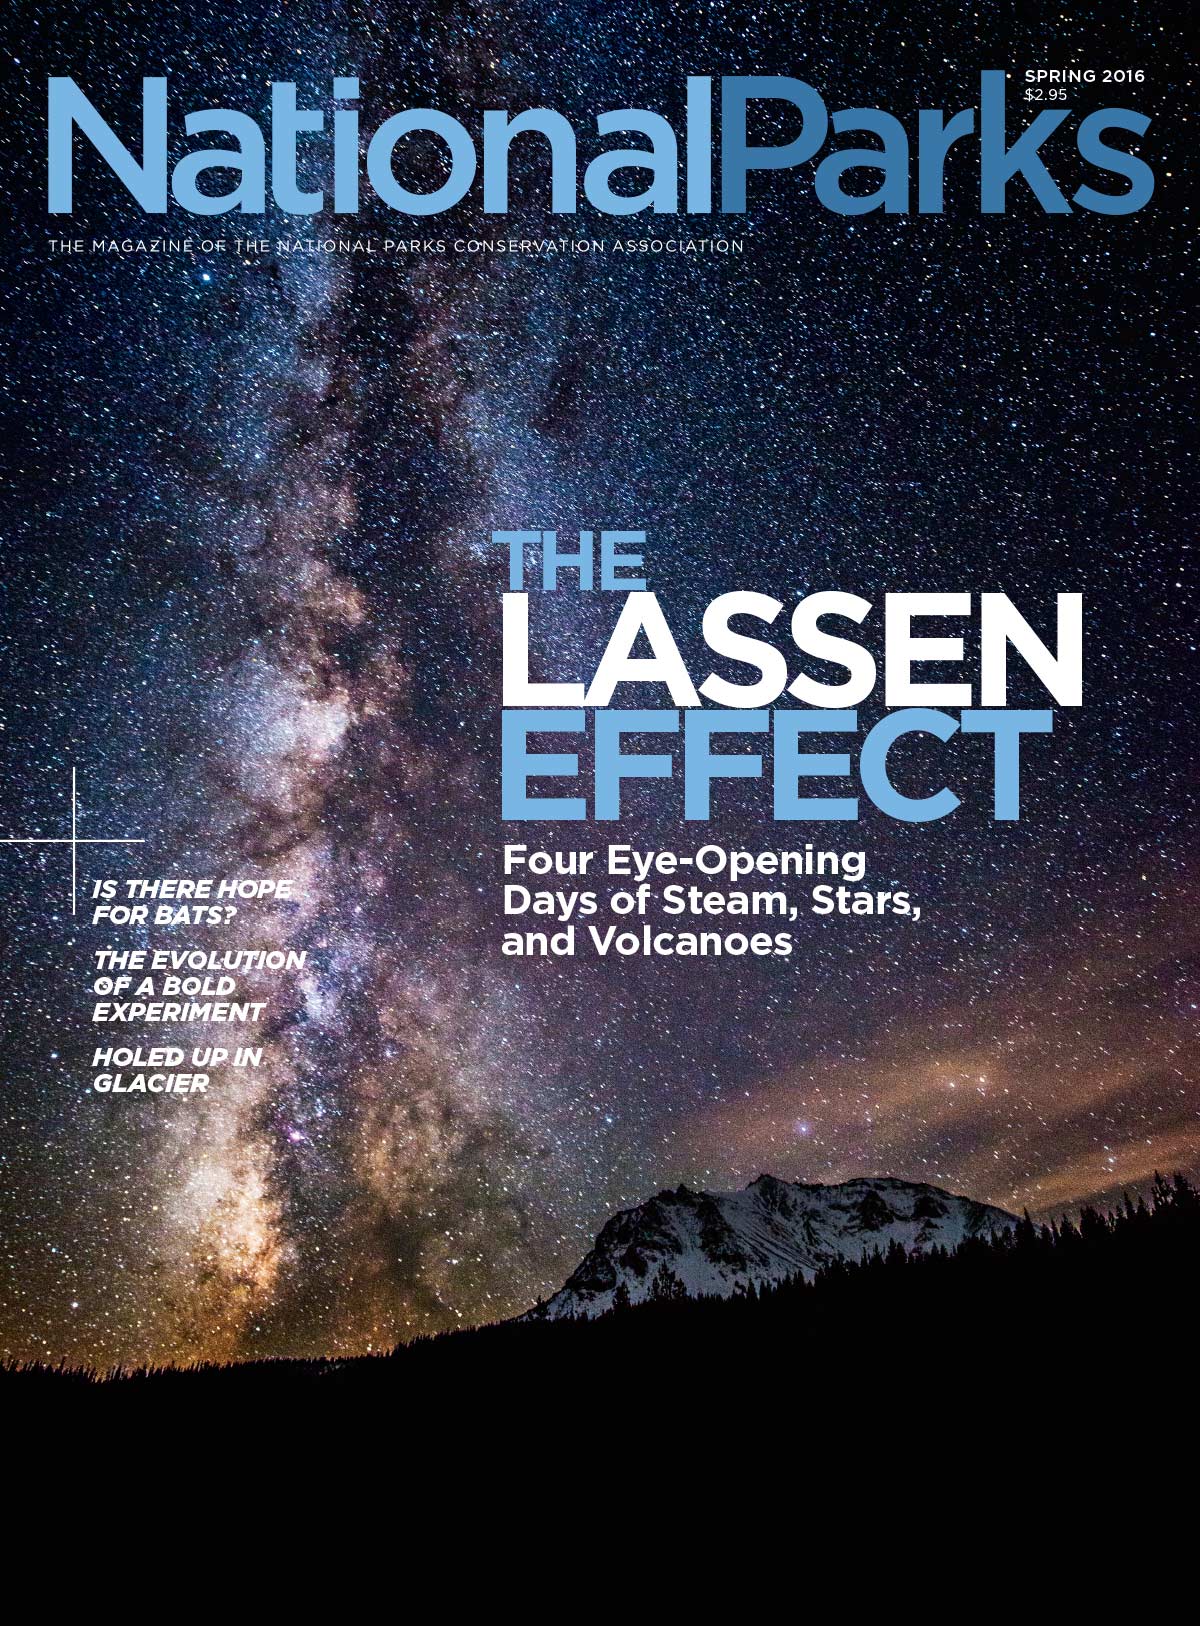 Cover of National Parks magazine showing  the night sky over Lassen National Park.